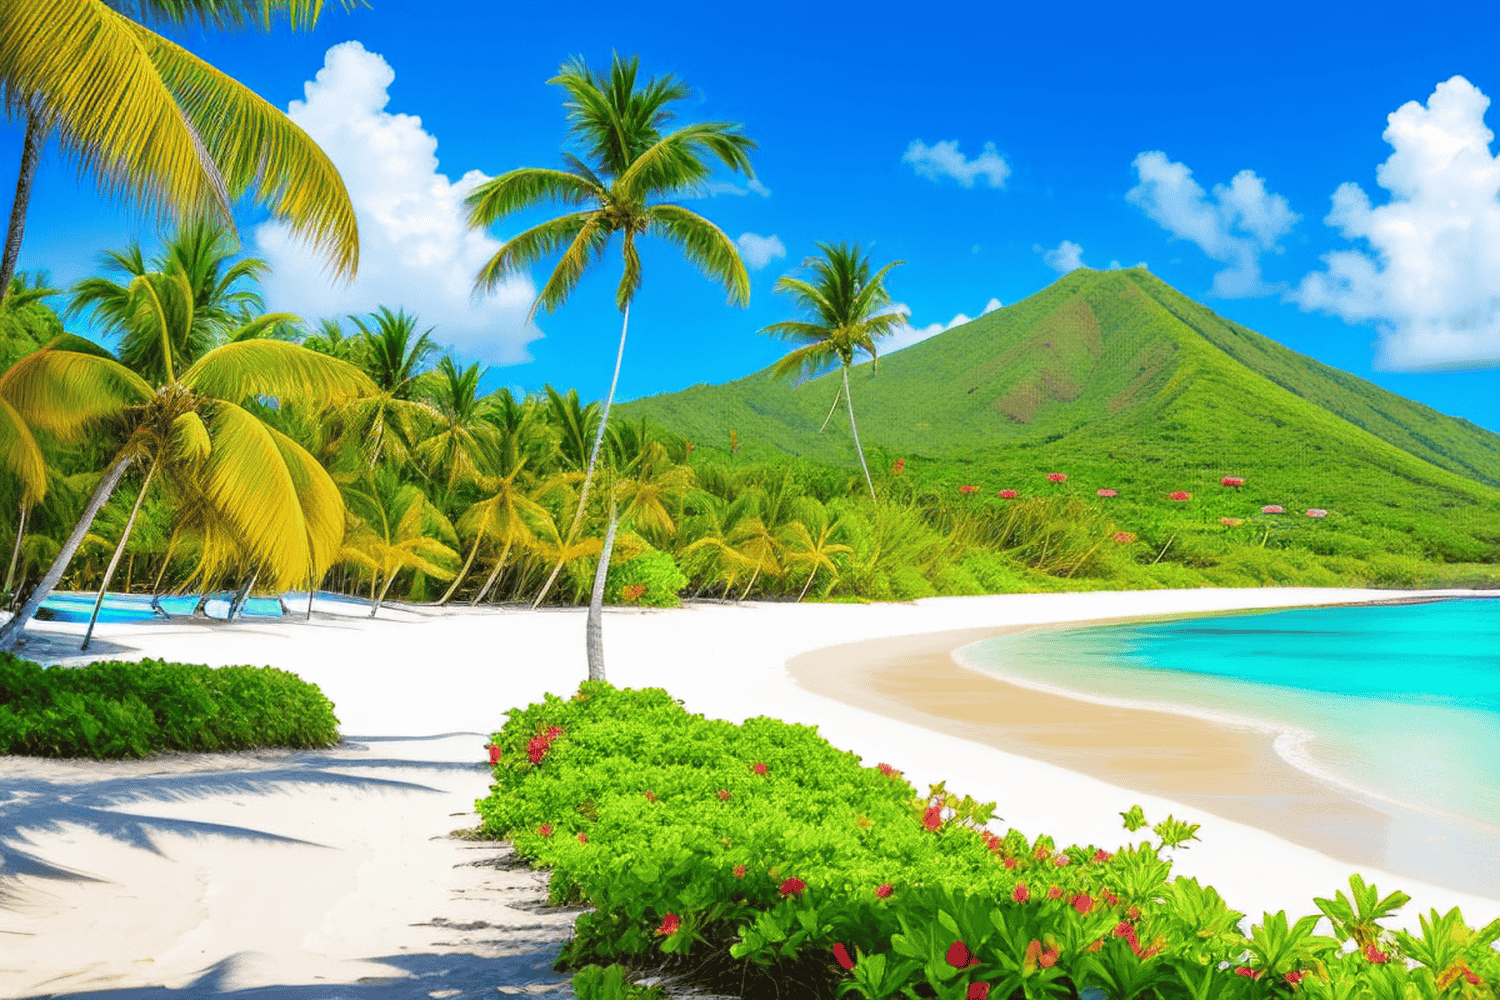 Information about Saint Kitts And Nevis